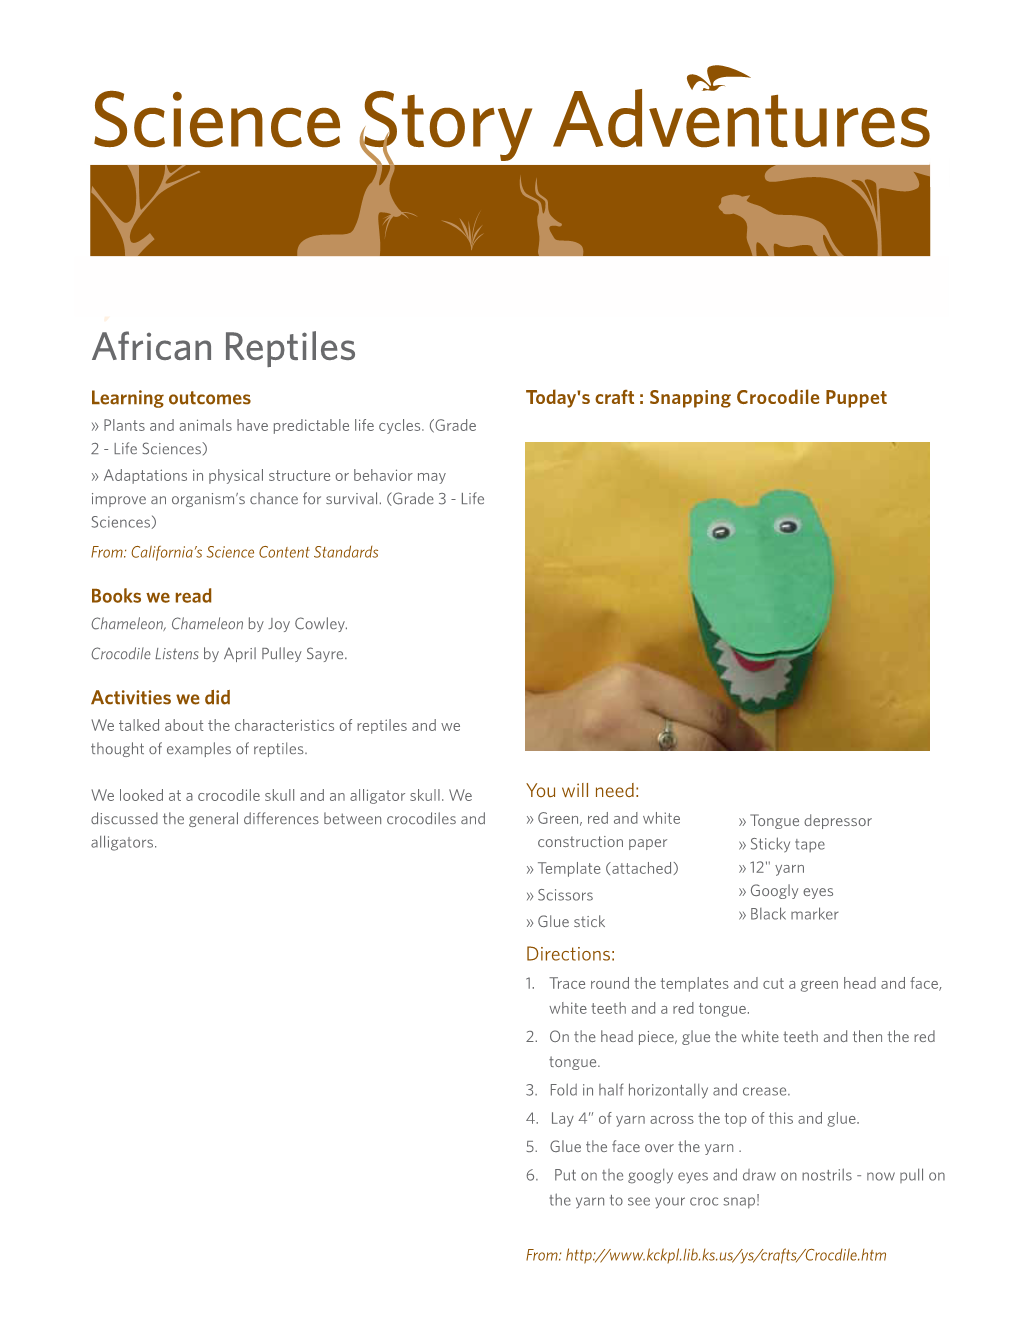 African Reptiles Learning Outcomes Today's Craft : Snapping Crocodile Puppet » Plants and Animals Have Predictable Life Cycles